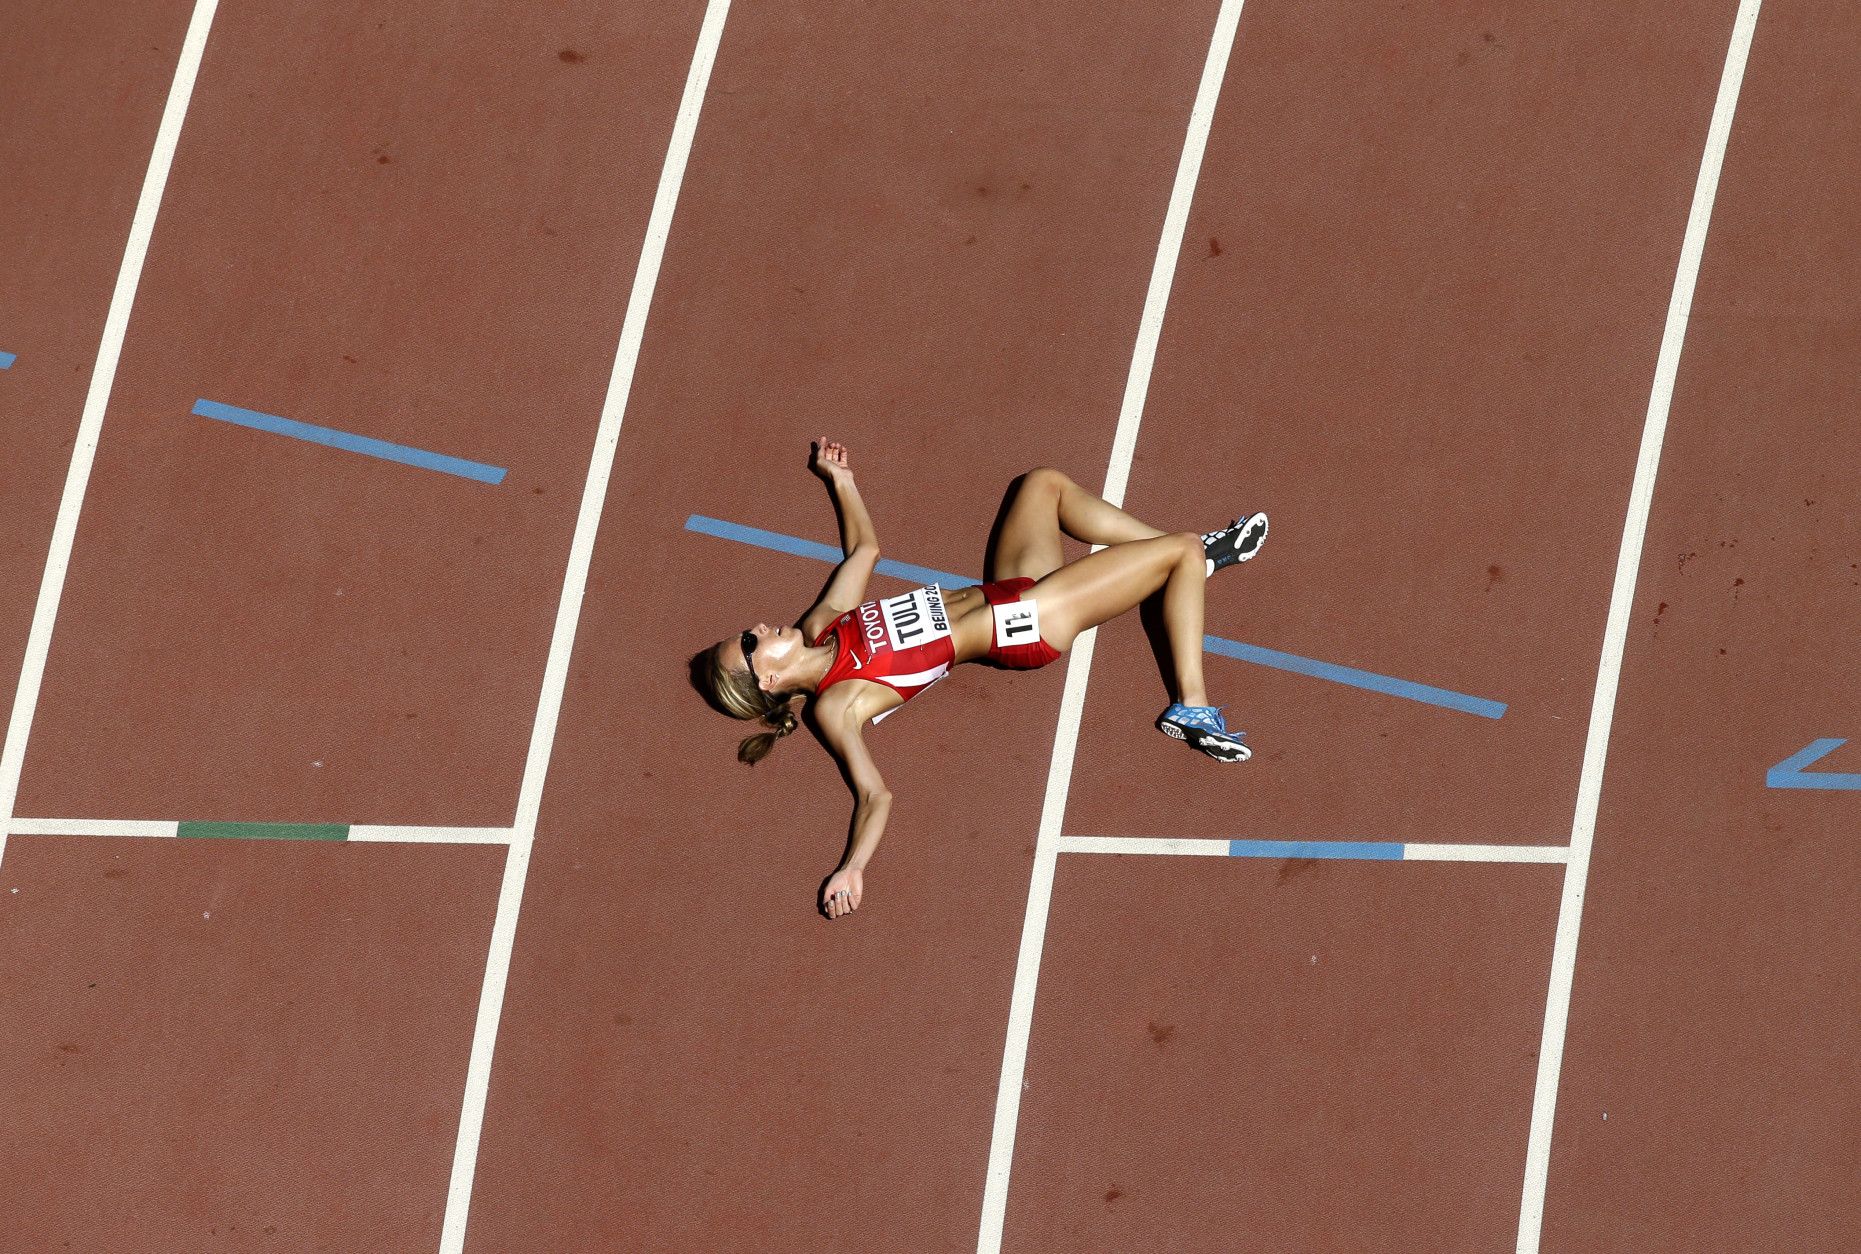 United States' Nicole Tully lays on the track after completing a round one heat of the women's 5000m at the World Athletics Championships at the Bird's Nest stadium in Beijing, Thursday, Aug. 27, 2015.   (AP Photo/Wong Maye-E)